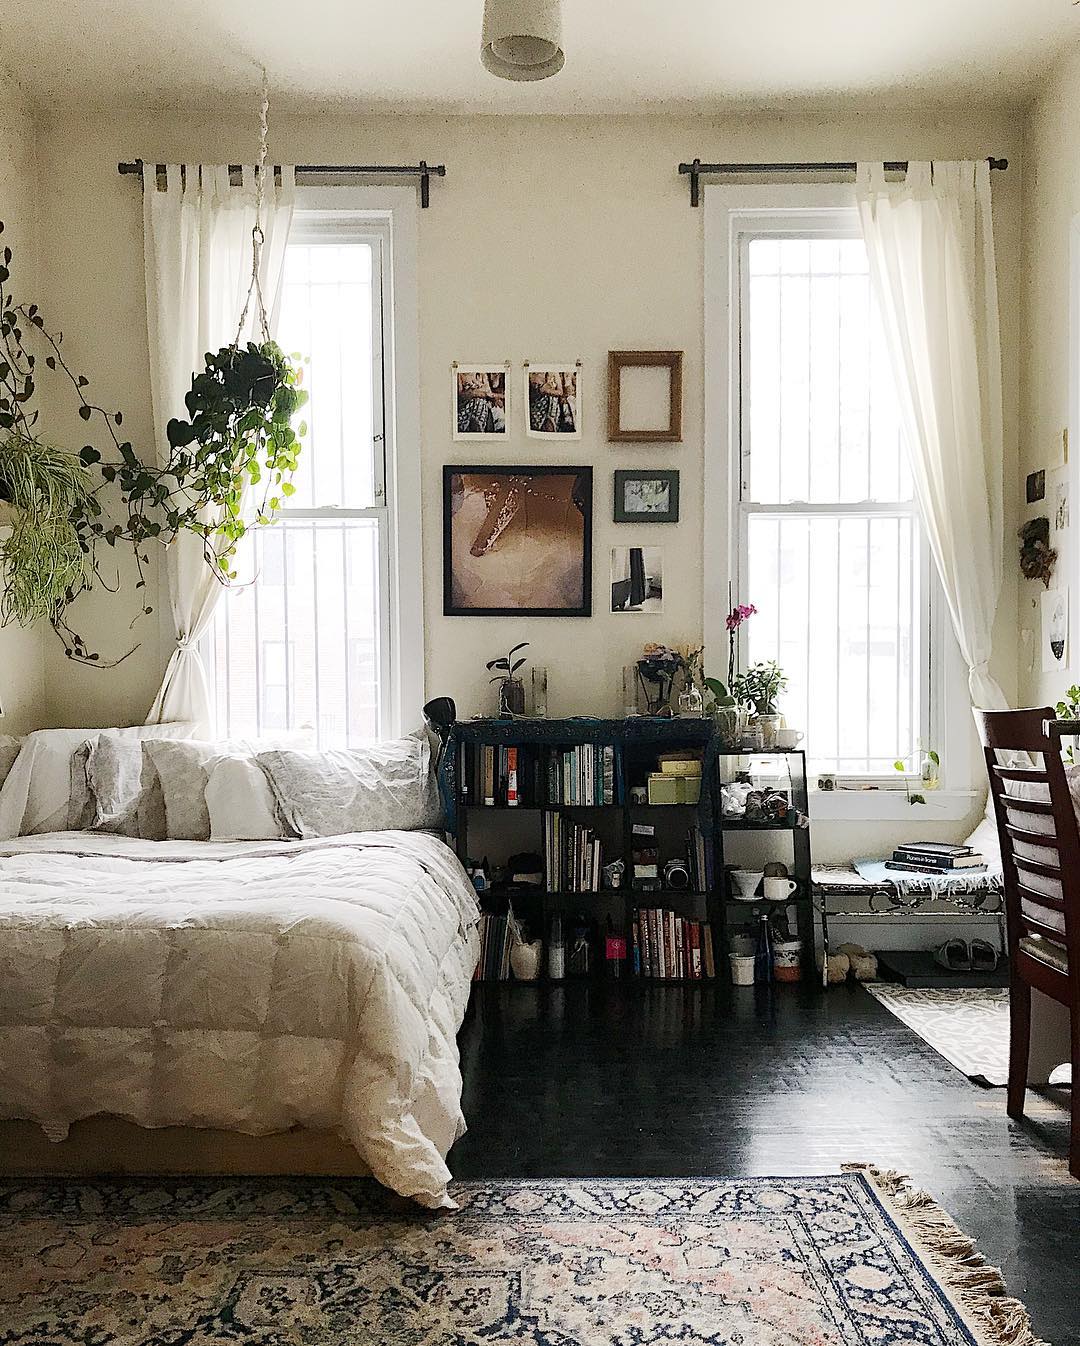 All white bedroom with dark floors in apartment. Photo by Instagram user @etshipley